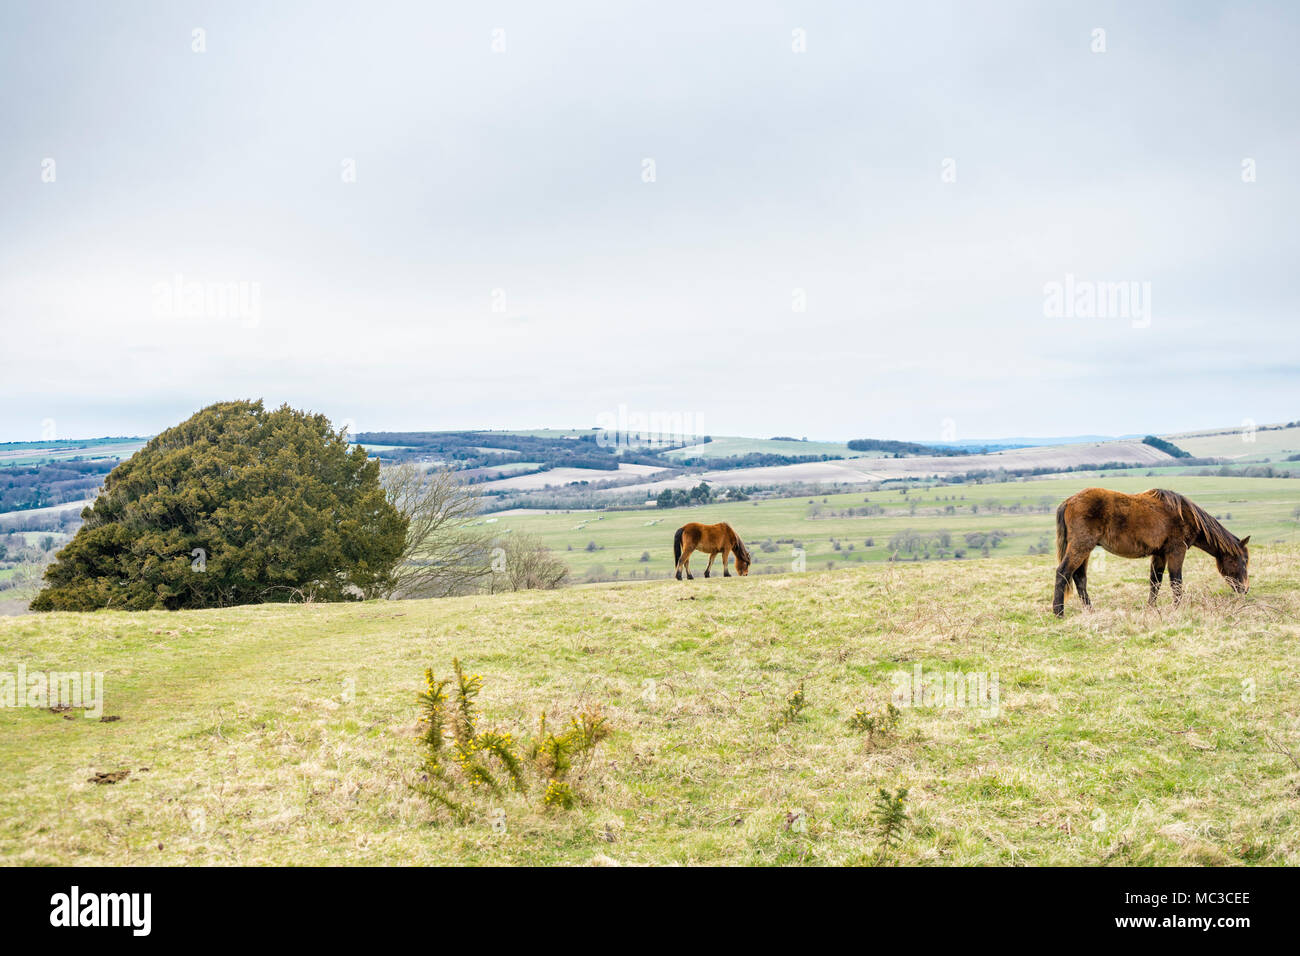 Ponies at Cissbury Ring, one of the largest hill forts in Europe, in the South Downs National Park in the English county of West Sussex, England, UK Stock Photo